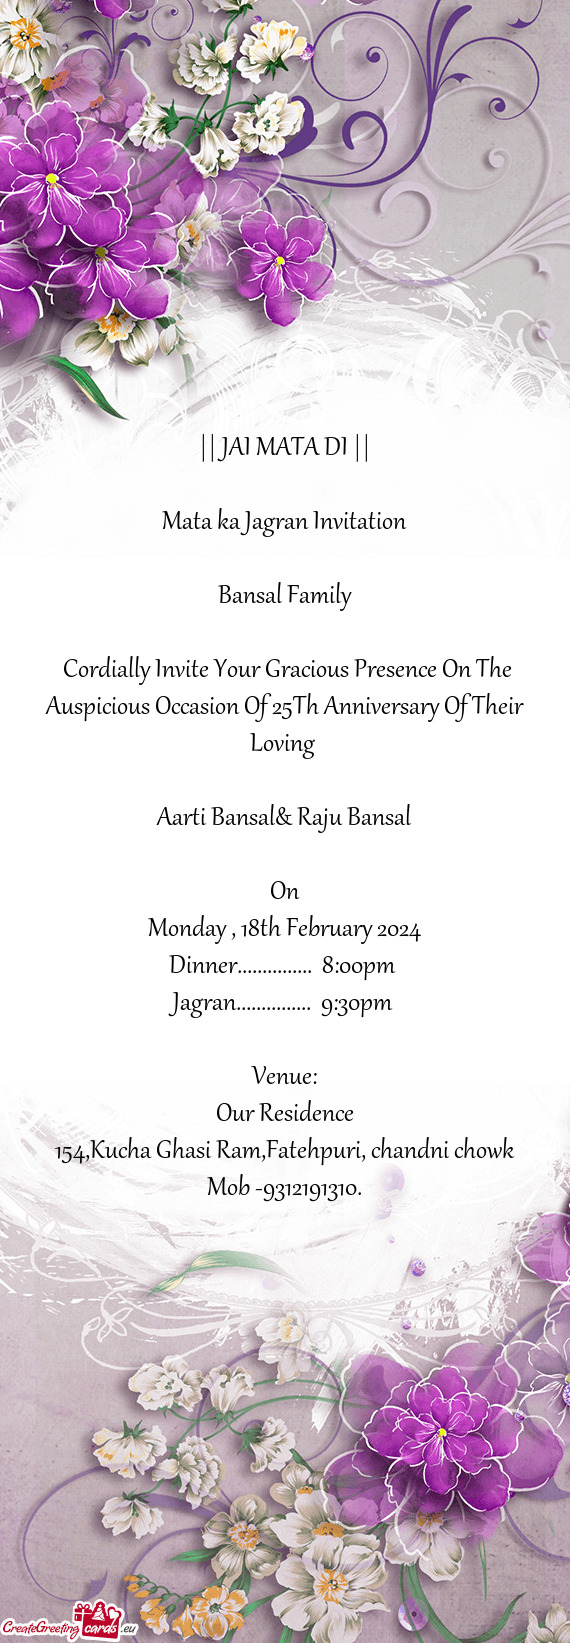 Cordially Invite Your Gracious Presence On The Auspicious Occasion Of 25Th Anniversary Of Their Lov